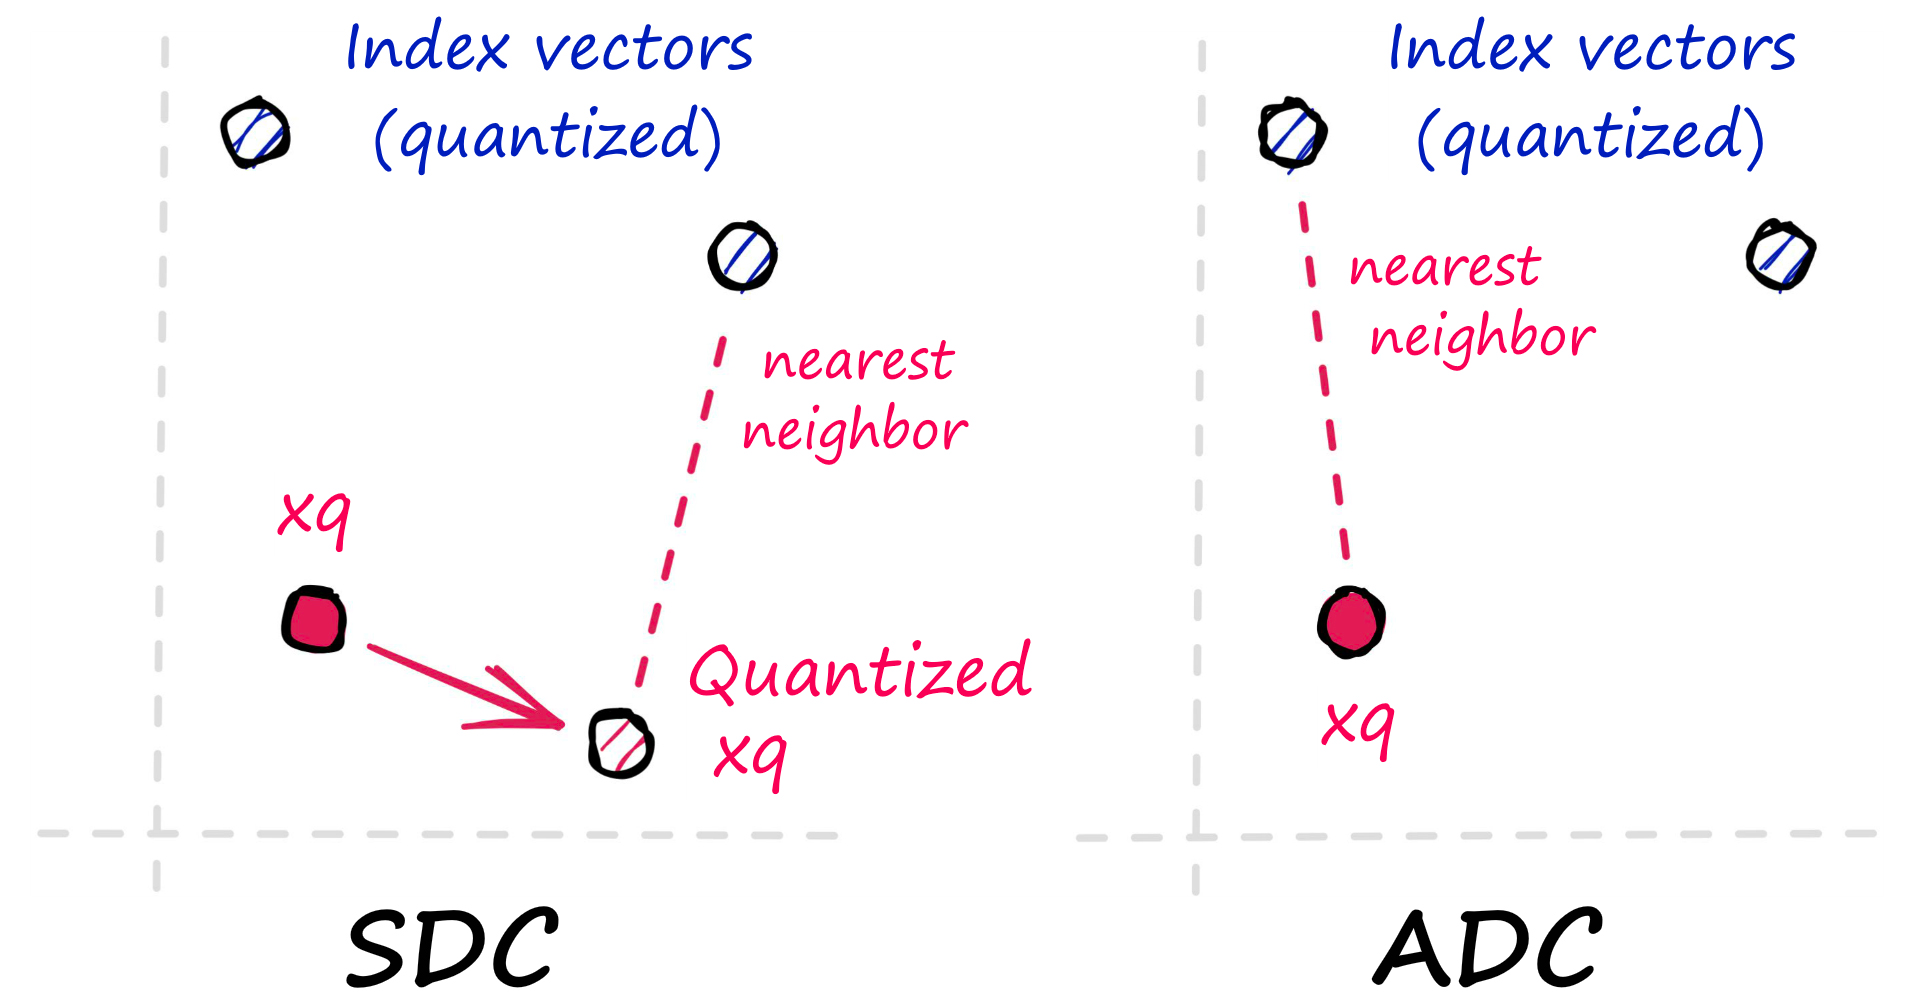 With symmetric distance computation (SDC, left) we quantize xq before comparing it to our previously quantized xb vectors. ADC (right) skips the quantization of xq and compares it directly to the quantized xb vectors.